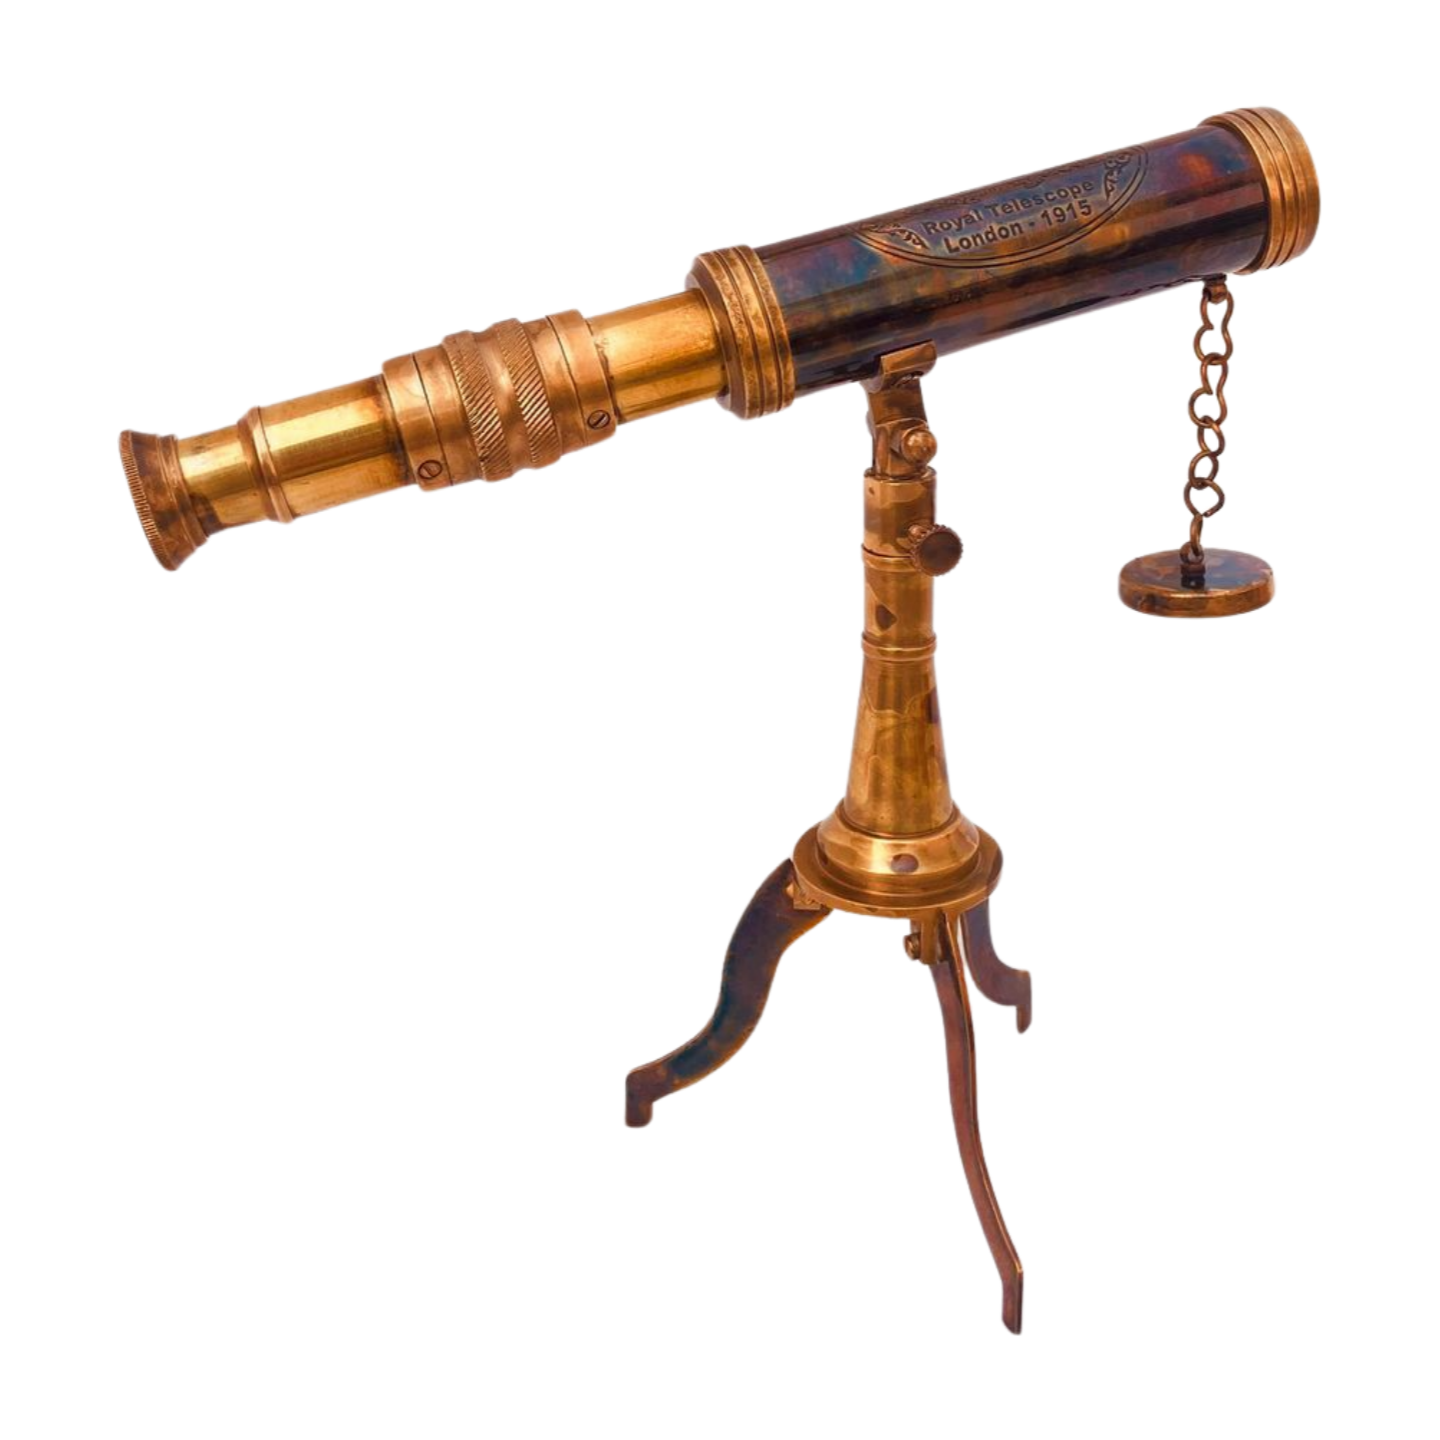 Rustic Spyglass Vintage Style Brass Telescope on Unique Stand -10"